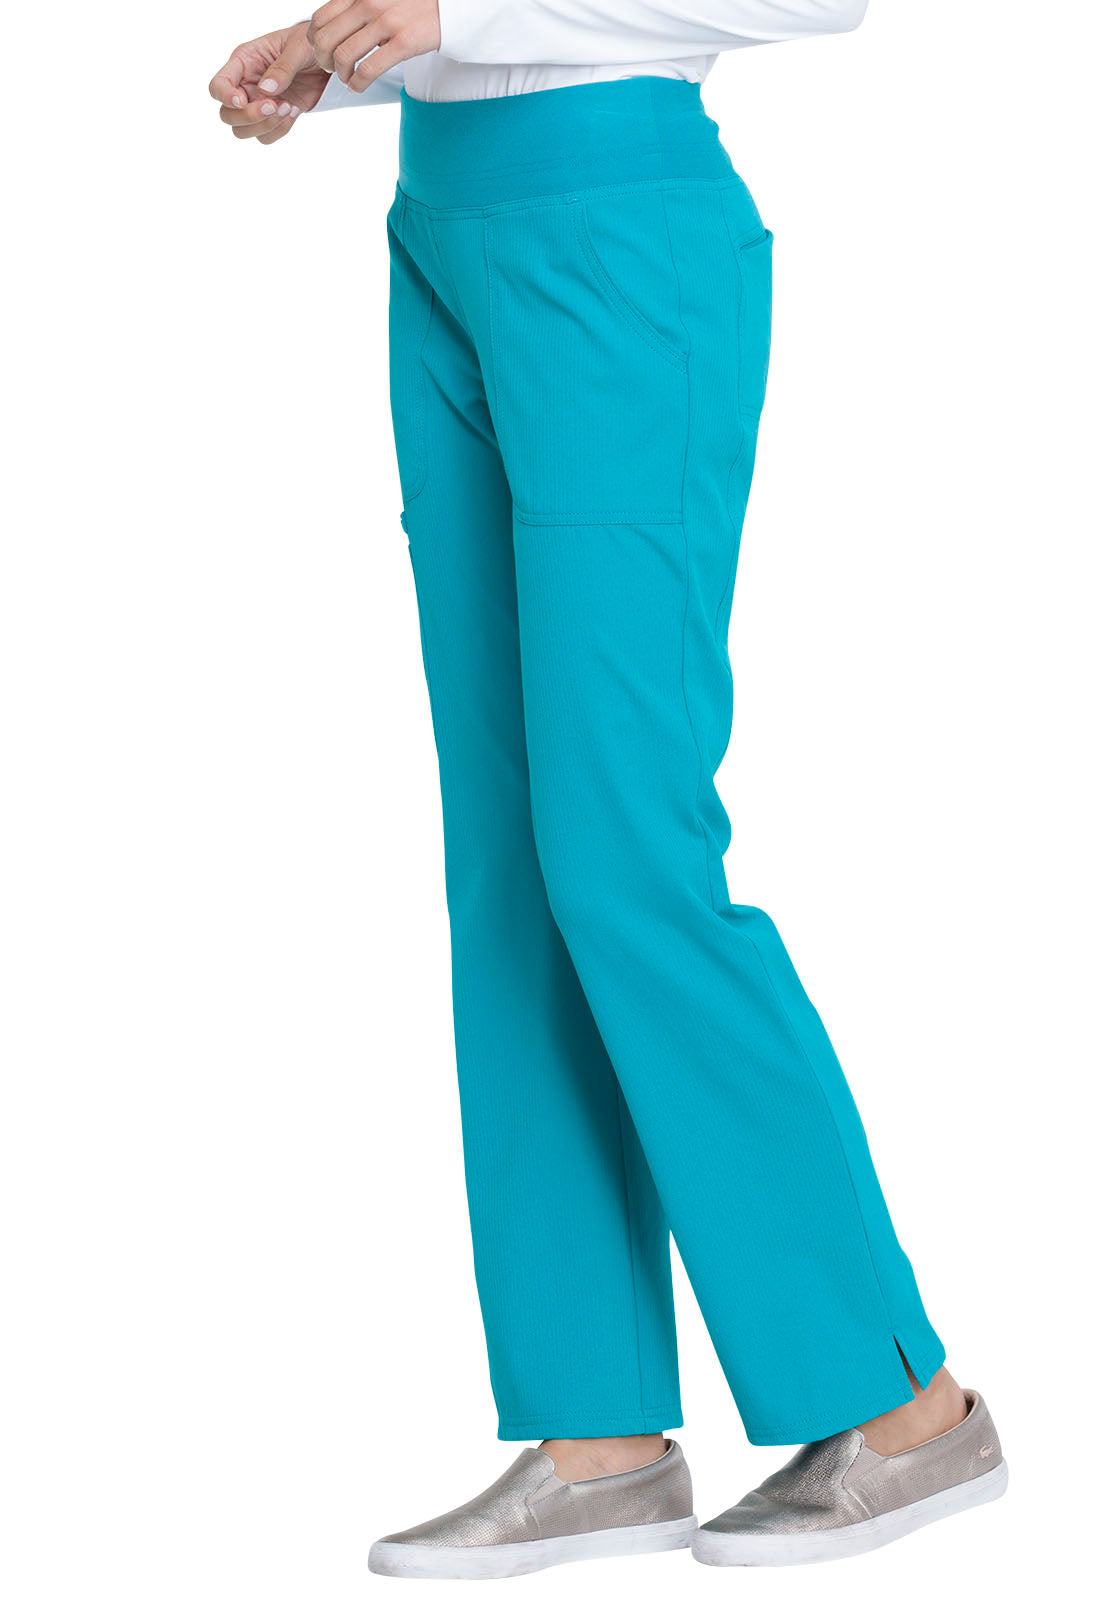 Elle Simply Polished Mid Rise Straight Leg Pull-on Pant in Teal